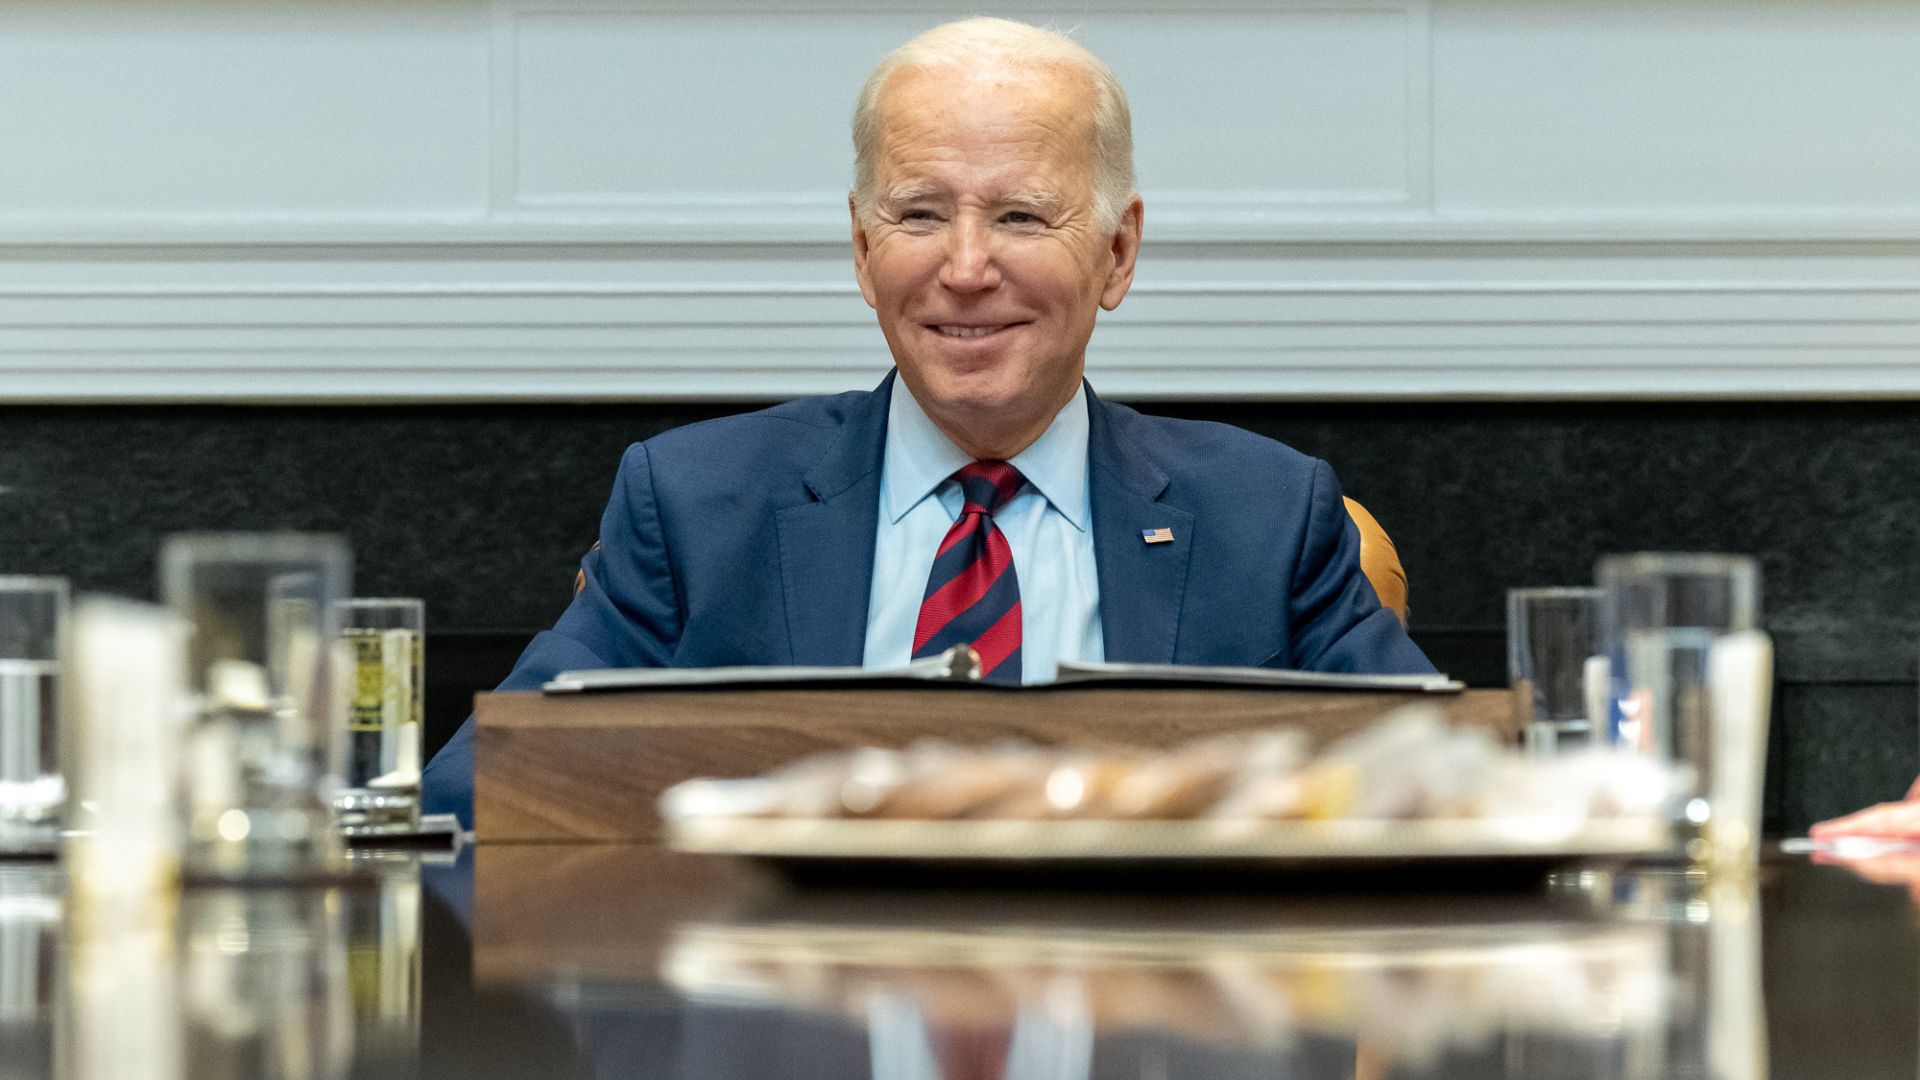 Democrats want Biden’s Power, EV climate plan to be relooked